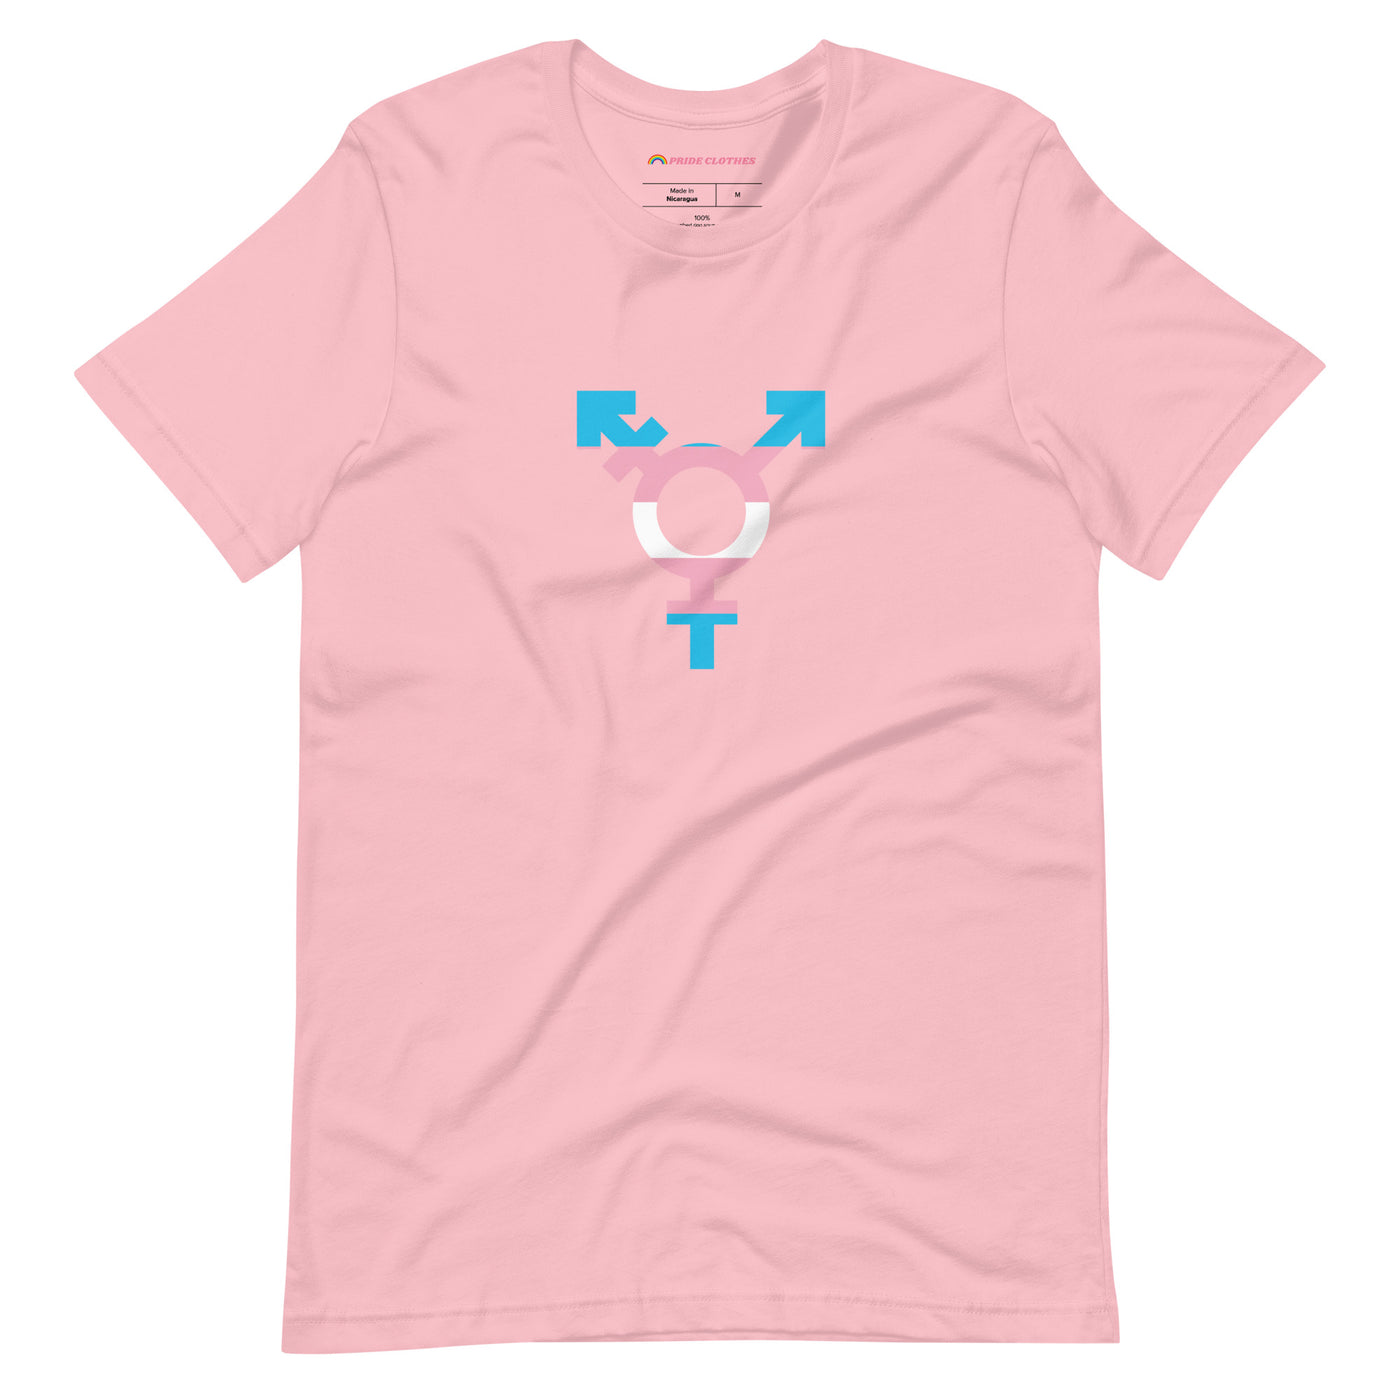 Pride Clothes - Authentic and Beautiful Trans Pride Flag Symbol T-Shirt - Pink